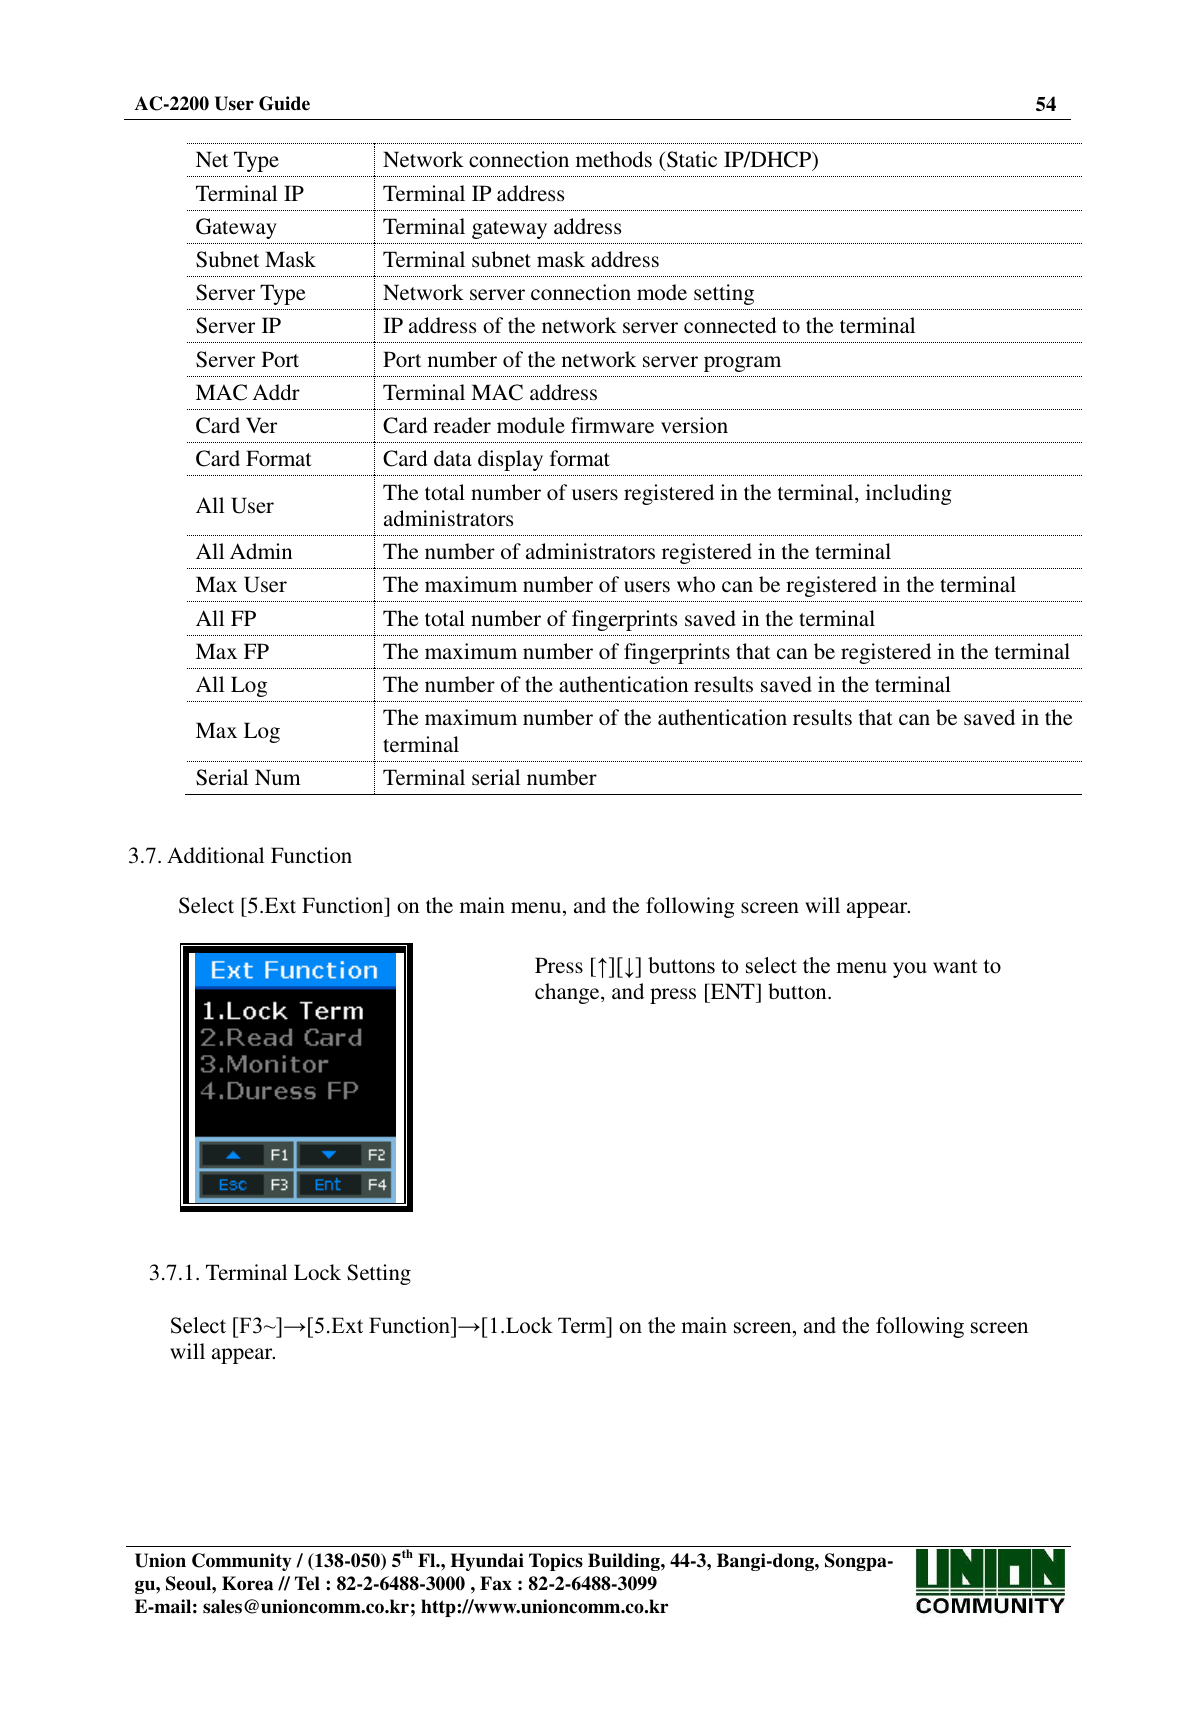  AC-2200 User Guide 54   Union Community / (138-050) 5th Fl., Hyundai Topics Building, 44-3, Bangi-dong, Songpa-gu, Seoul, Korea // Tel : 82-2-6488-3000 , Fax : 82-2-6488-3099 E-mail: sales@unioncomm.co.kr; http://www.unioncomm.co.kr   Net Type Network connection methods (Static IP/DHCP) Terminal IP Terminal IP address Gateway Terminal gateway address Subnet Mask Terminal subnet mask address Server Type Network server connection mode setting Server IP IP address of the network server connected to the terminal Server Port Port number of the network server program MAC Addr Terminal MAC address Card Ver Card reader module firmware version Card Format Card data display format All User The total number of users registered in the terminal, including administrators All Admin The number of administrators registered in the terminal Max User The maximum number of users who can be registered in the terminal All FP The total number of fingerprints saved in the terminal Max FP The maximum number of fingerprints that can be registered in the terminal All Log The number of the authentication results saved in the terminal Max Log The maximum number of the authentication results that can be saved in the terminal Serial Num Terminal serial number   3.7. Additional Function  Select [5.Ext Function] on the main menu, and the following screen will appear.    Press [↑][↓] buttons to select the menu you want to change, and press [ENT] button.   3.7.1. Terminal Lock Setting  Select [F3~]→[5.Ext Function]→[1.Lock Term] on the main screen, and the following screen will appear.  